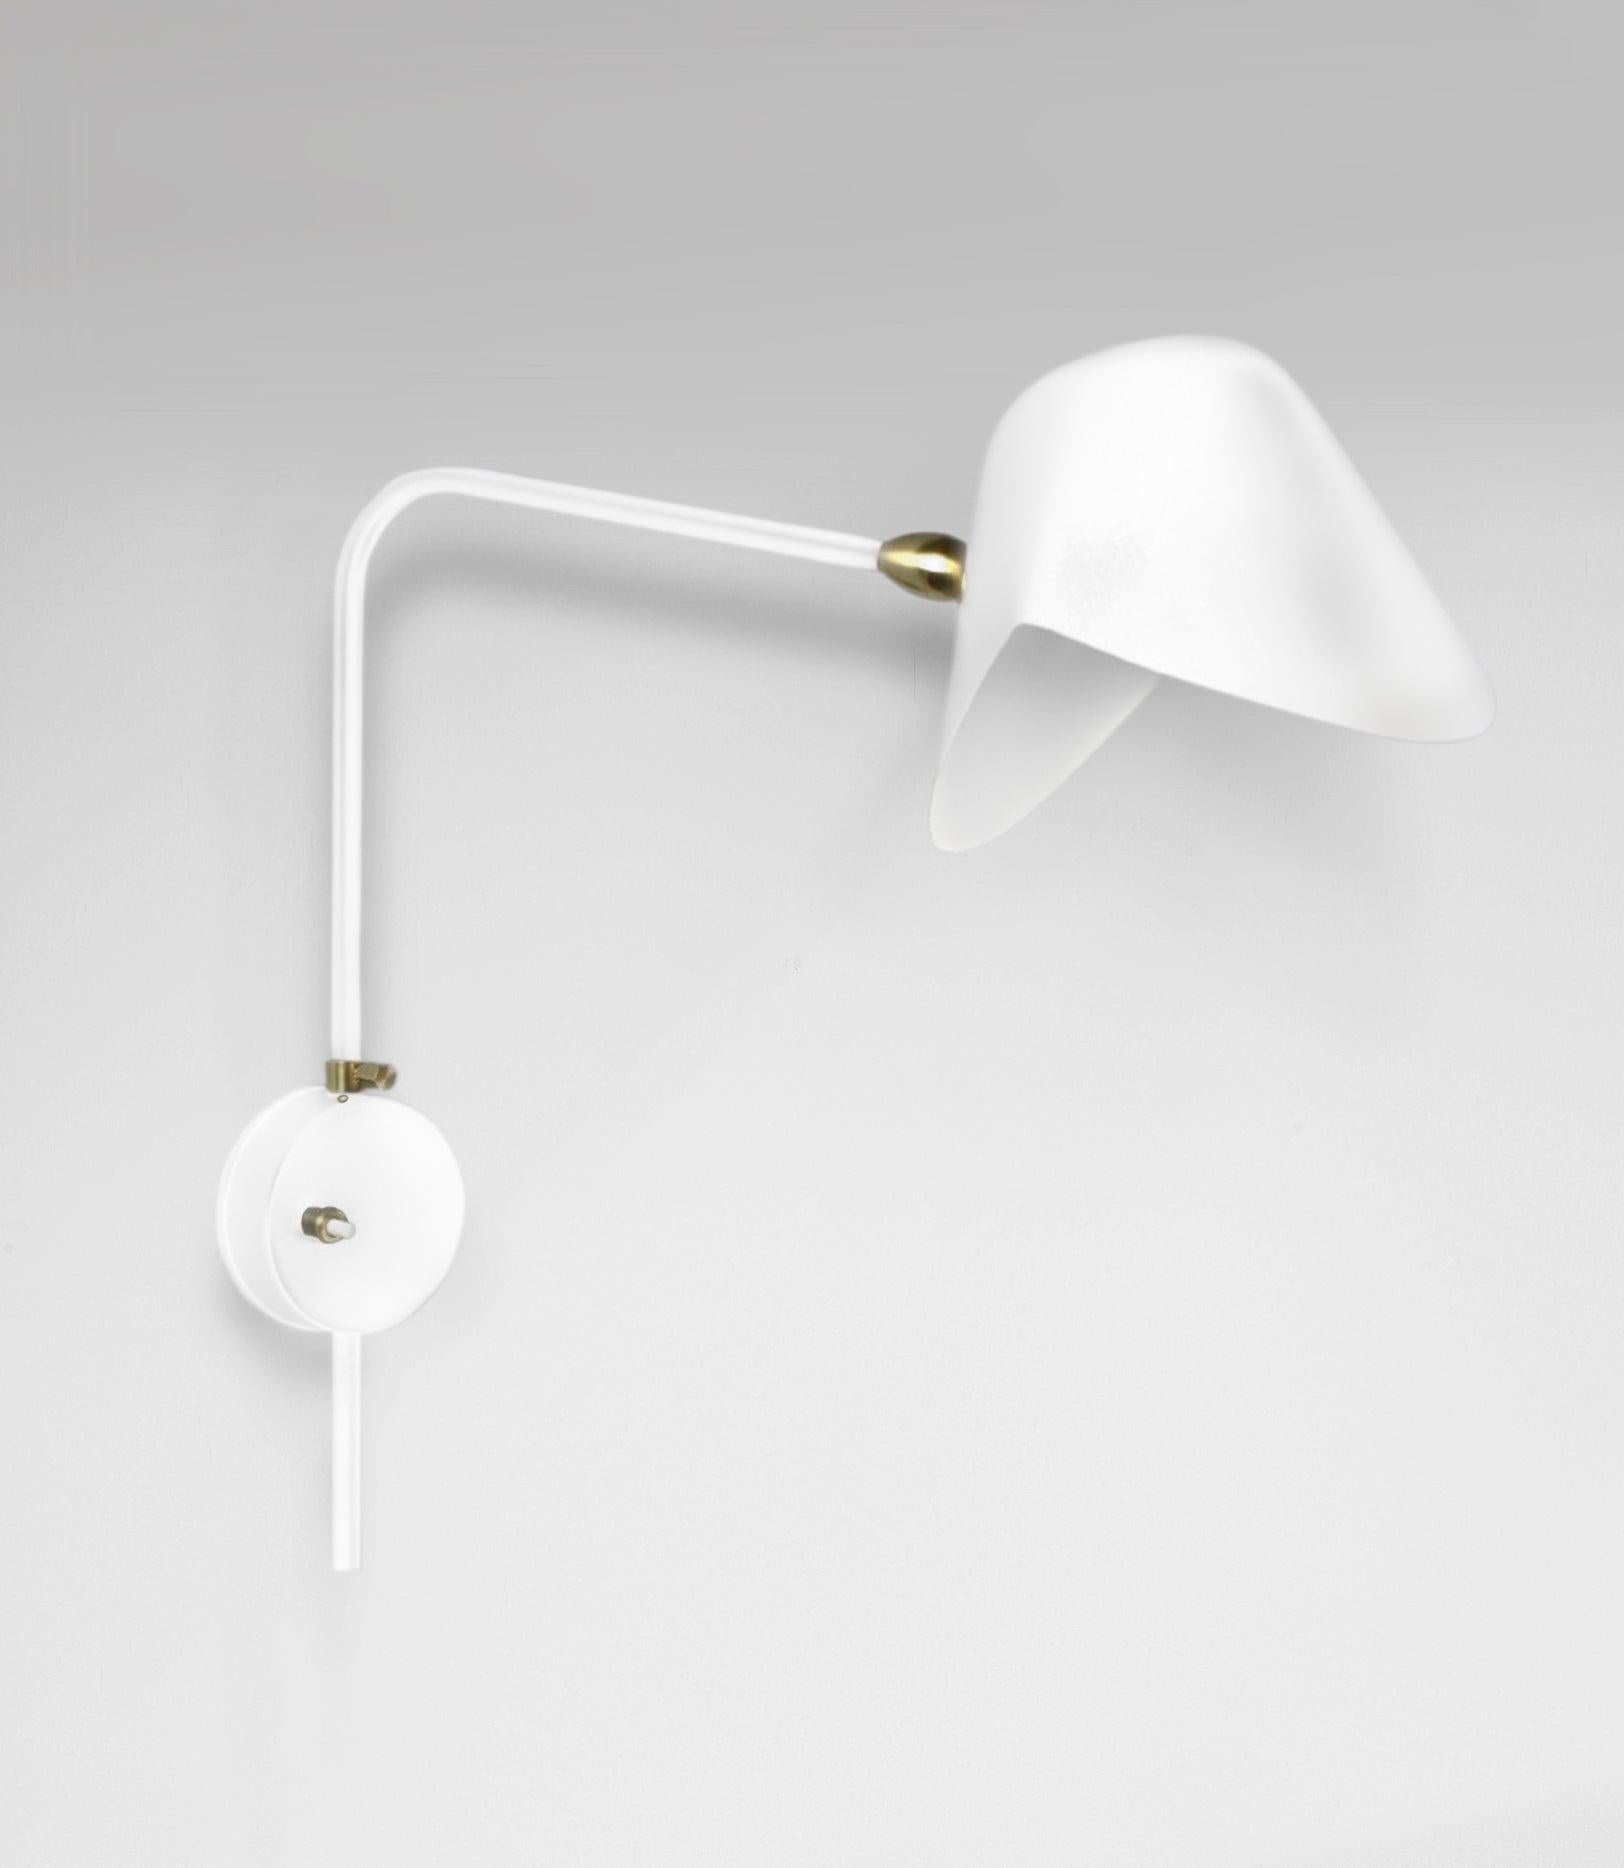 French Serge Mouille Mid-Century Modern White Anthony Wall Lamp with Round Fixation Box For Sale